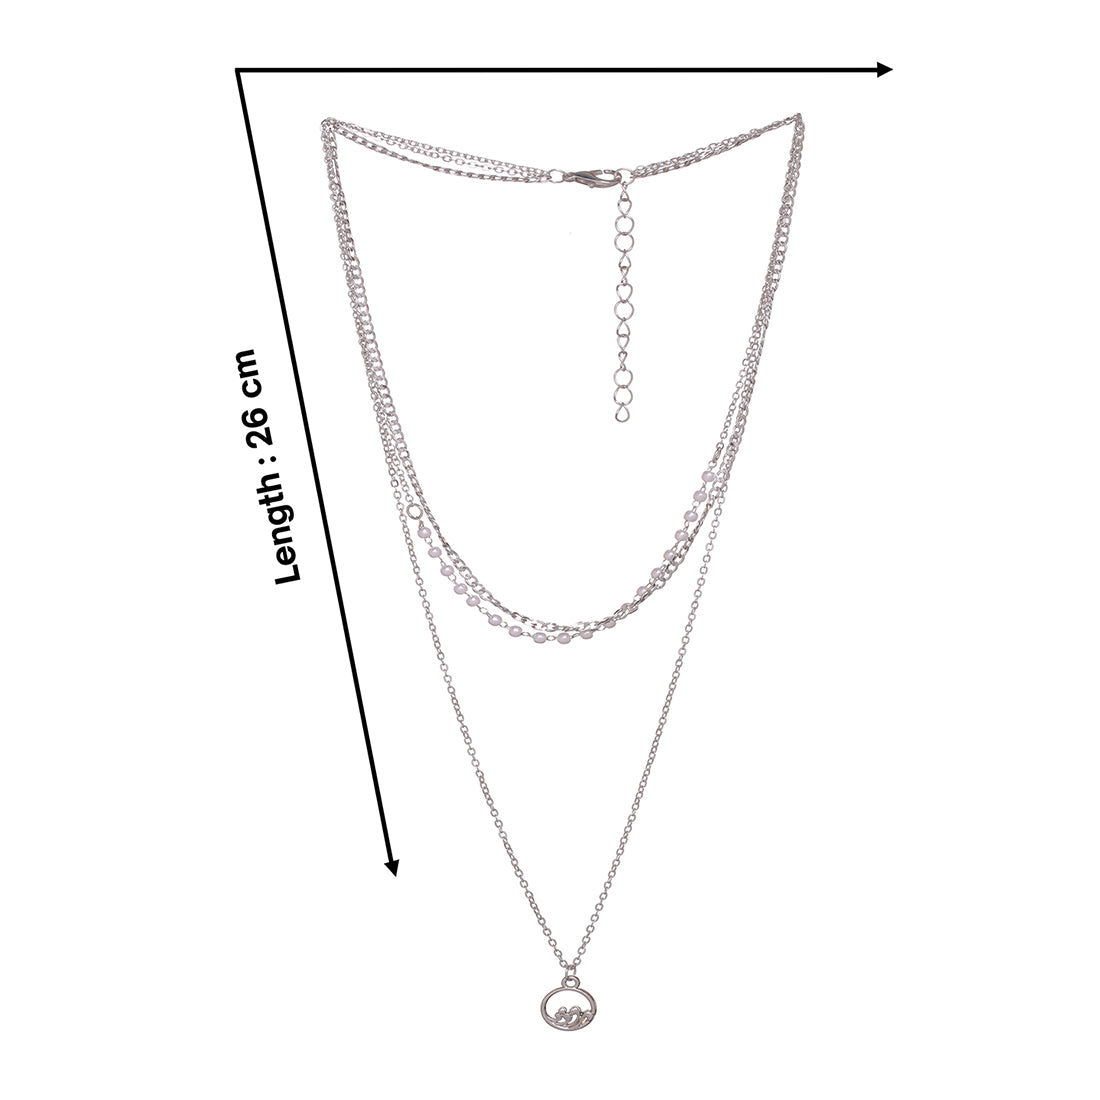 3-Layered Silver Chain Necklace With Delicate Pearls And Minimalist Rhinestone Pendant